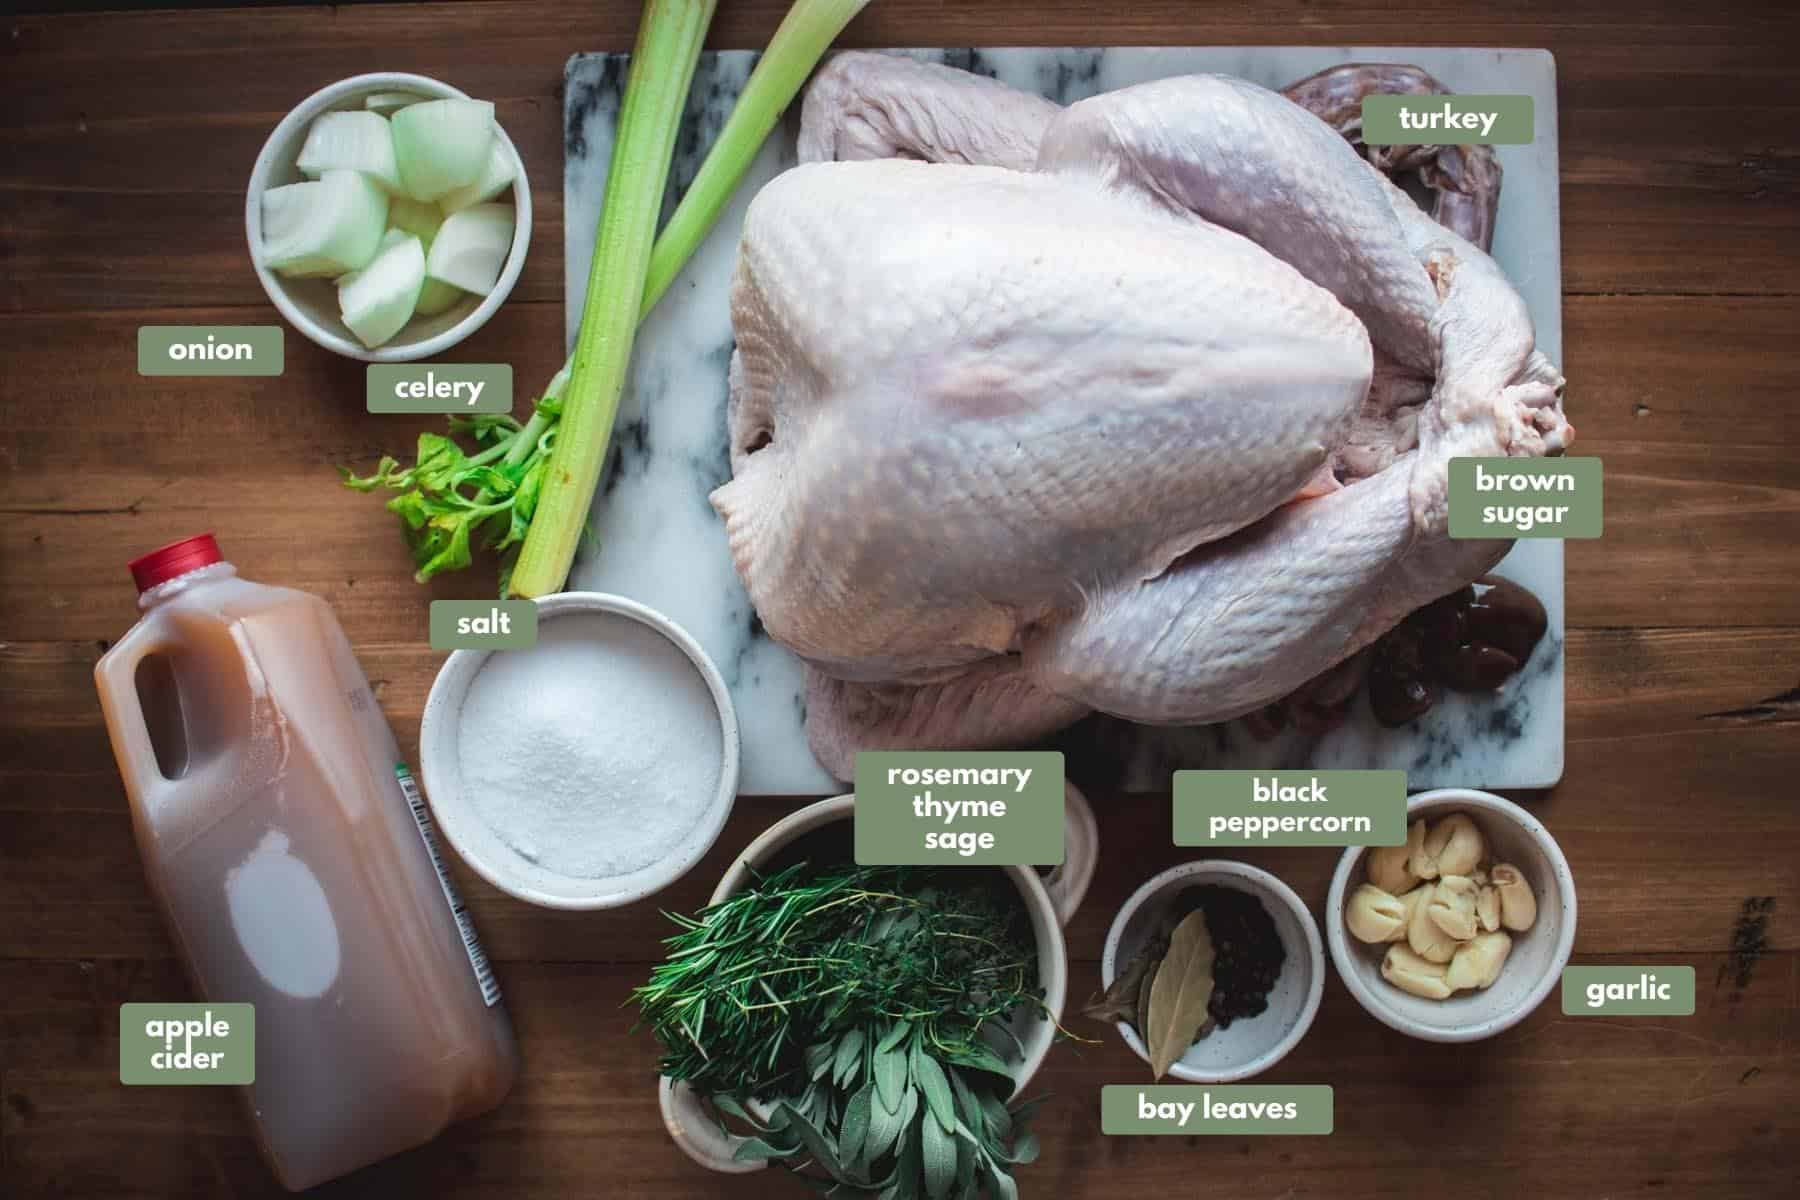 Ingredients required to brine your turkey. There is a turkey sitting on a white marble chopping board next to some celery. There is also bowls on the wooden countertop. One bowl contains garlic, another black peppercorns and bay leafs. In another bowl there is herbs like rosemary thyme and sage and also a bowl of salt. There is a bottle of apple cider and a bowl containing onion and celery.